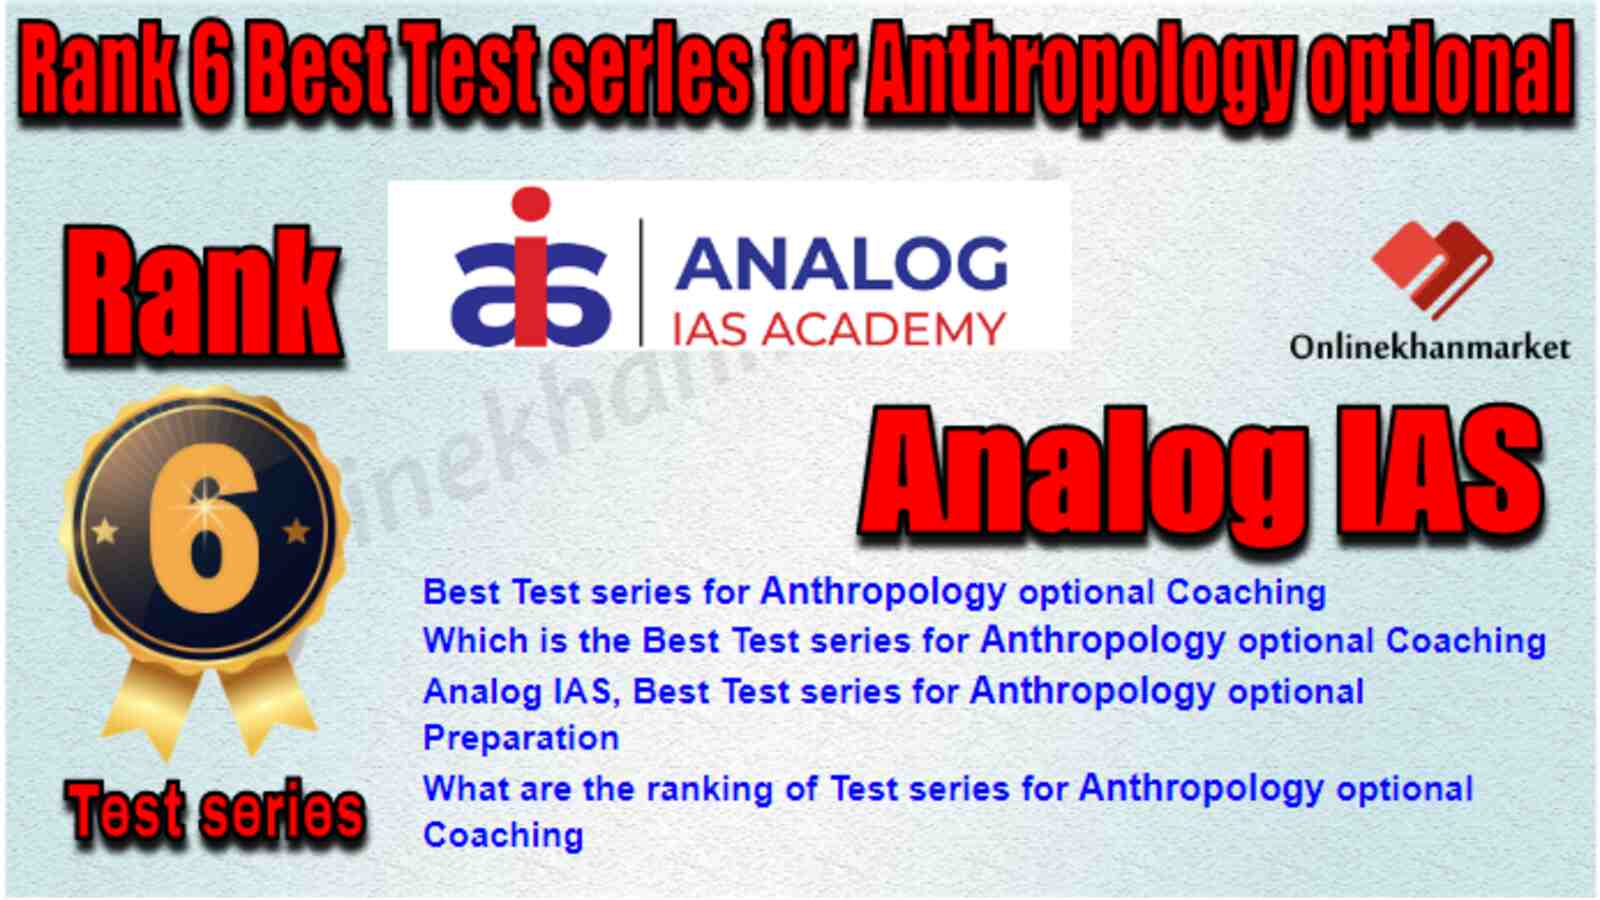 Rank 6 Best Test series for Anthropology optional